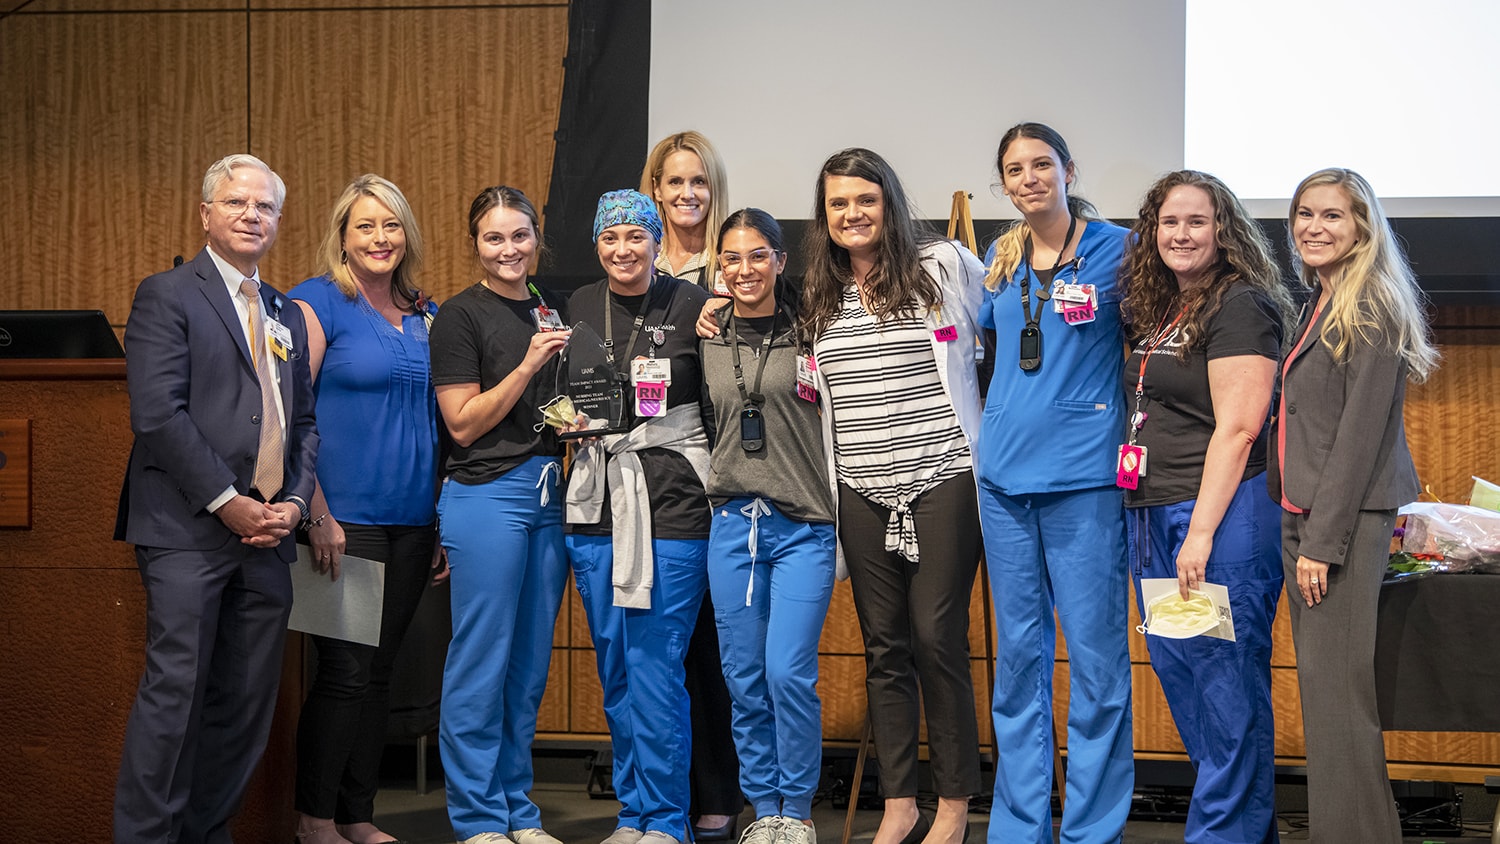 Steppe Mette, M.D., far left, presented the Team Impact Award to the E4 Intensive Care Unit nursing team, for their work caring for patients during the COVID-19 pandemic.